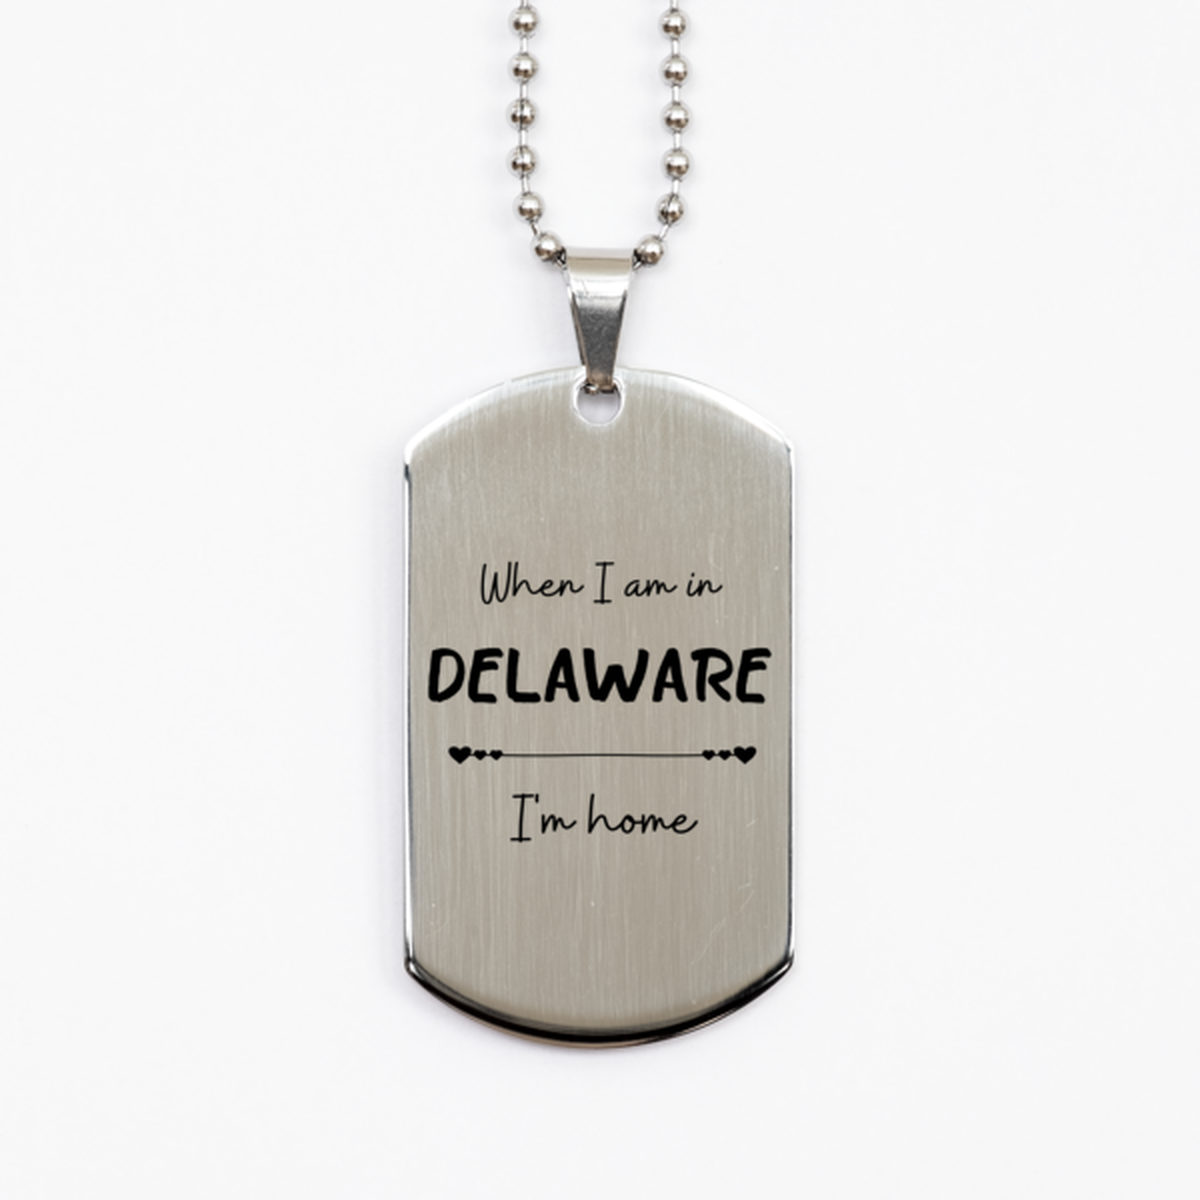 When I am in Delaware I'm home Silver Dog Tag, Cheap Gifts For Delaware, State Delaware Birthday Gifts for Friends Coworker